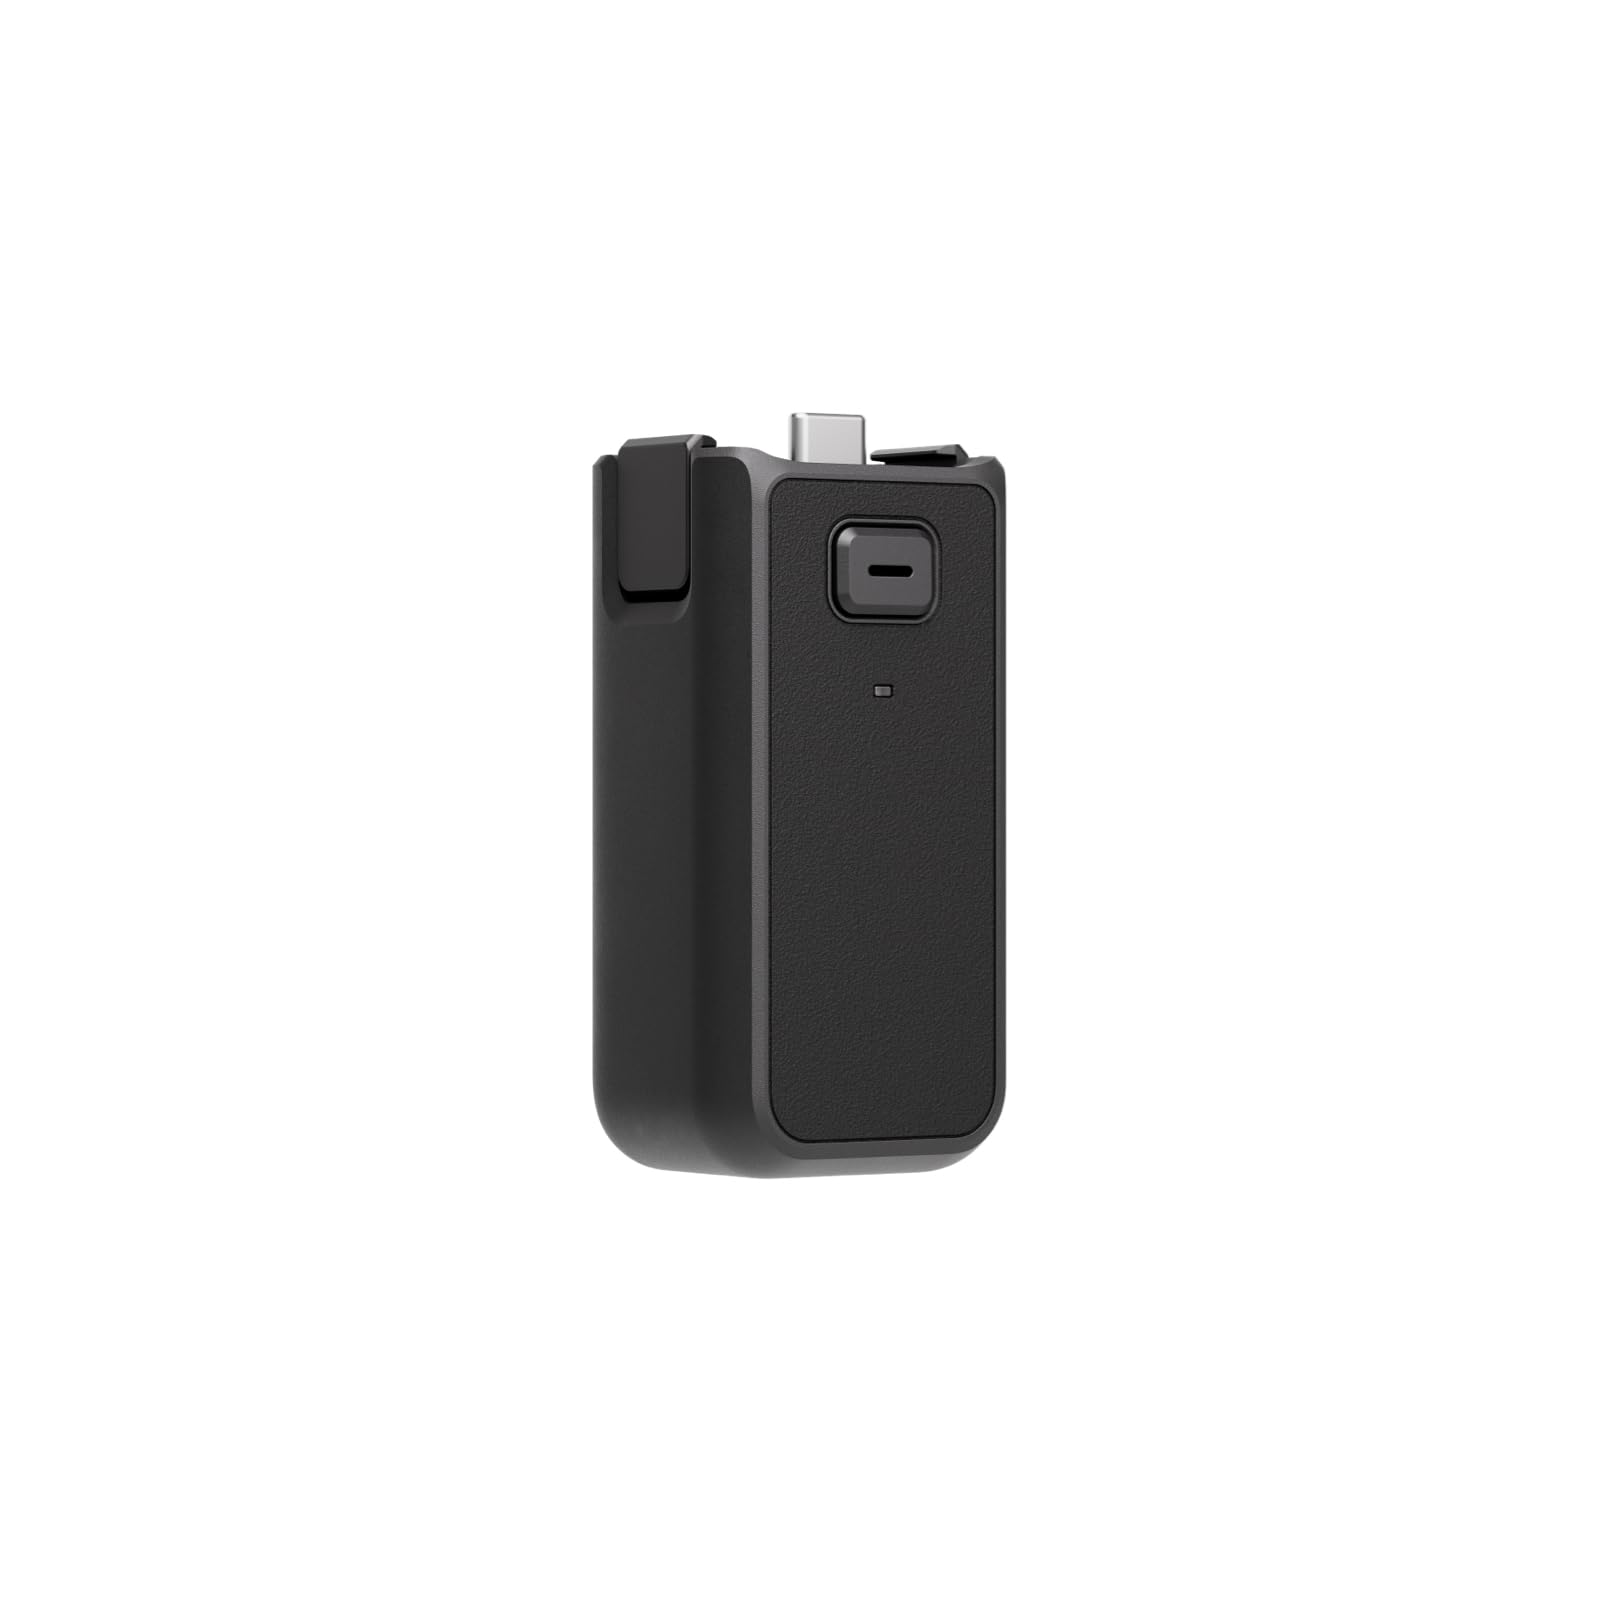 Osmo Pocket 3 Battery Handle, Compatibility: Osmo Pocket 3